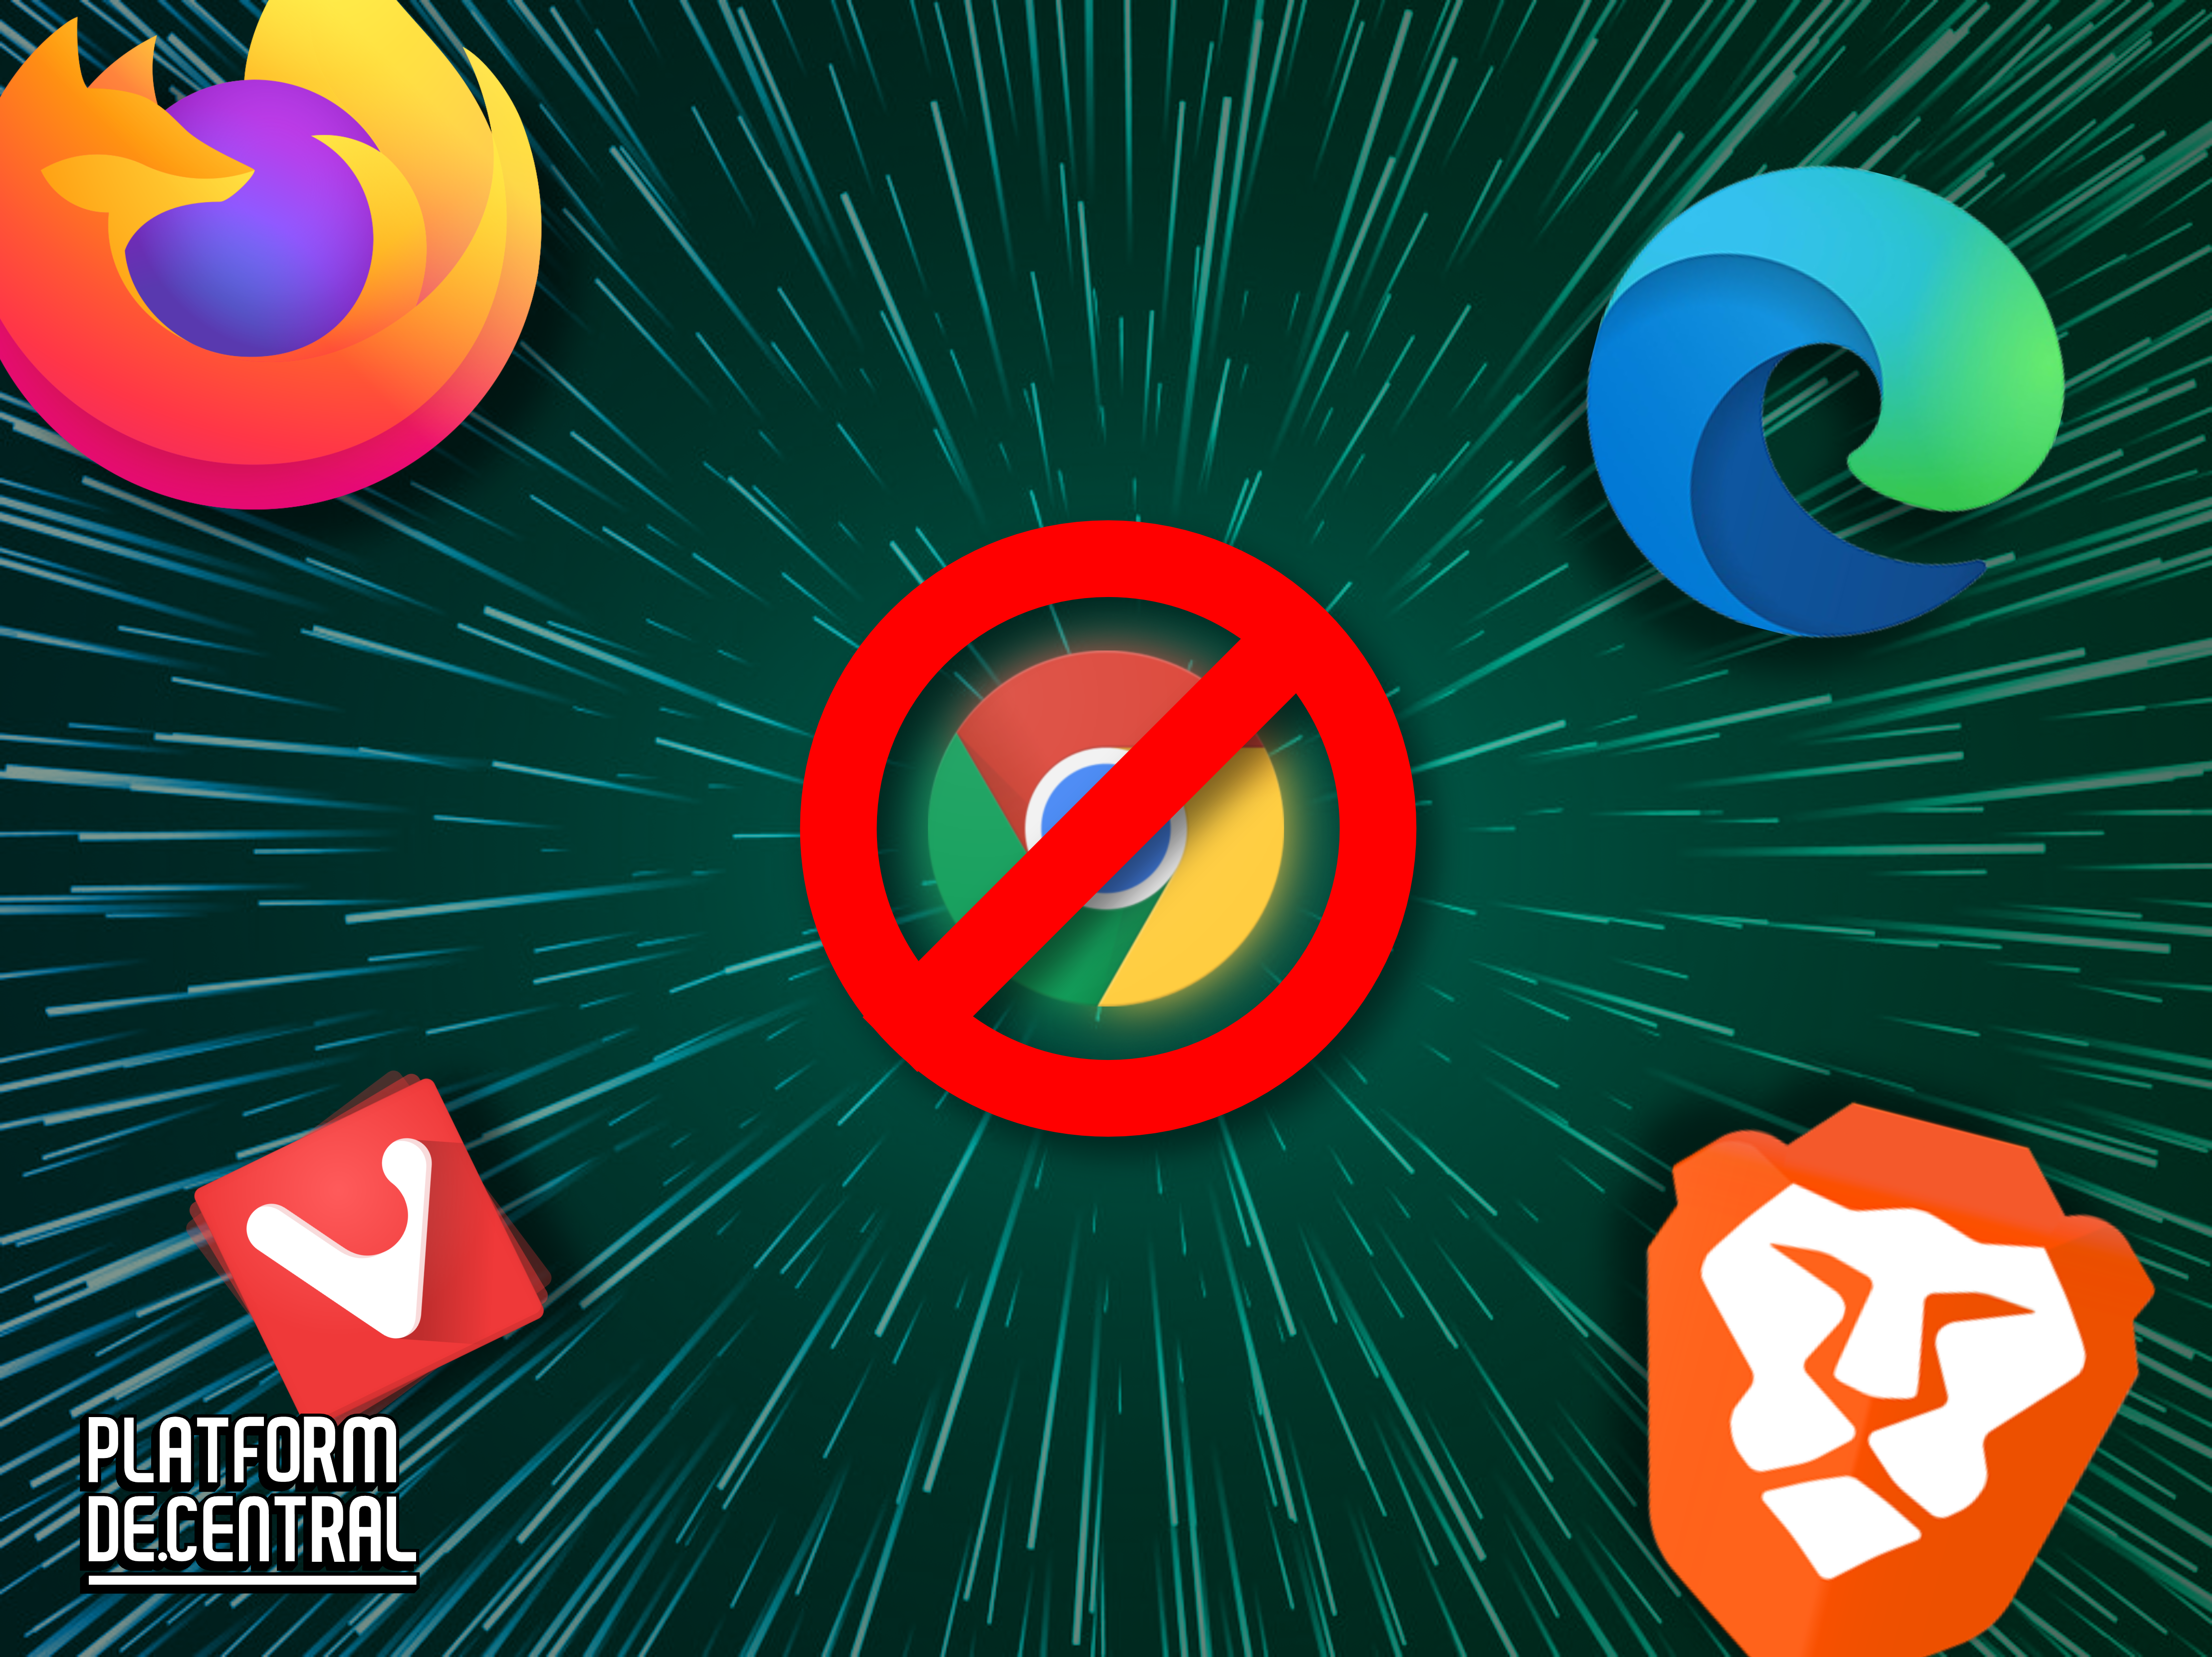 How to install alternative browsers on your Chromebook